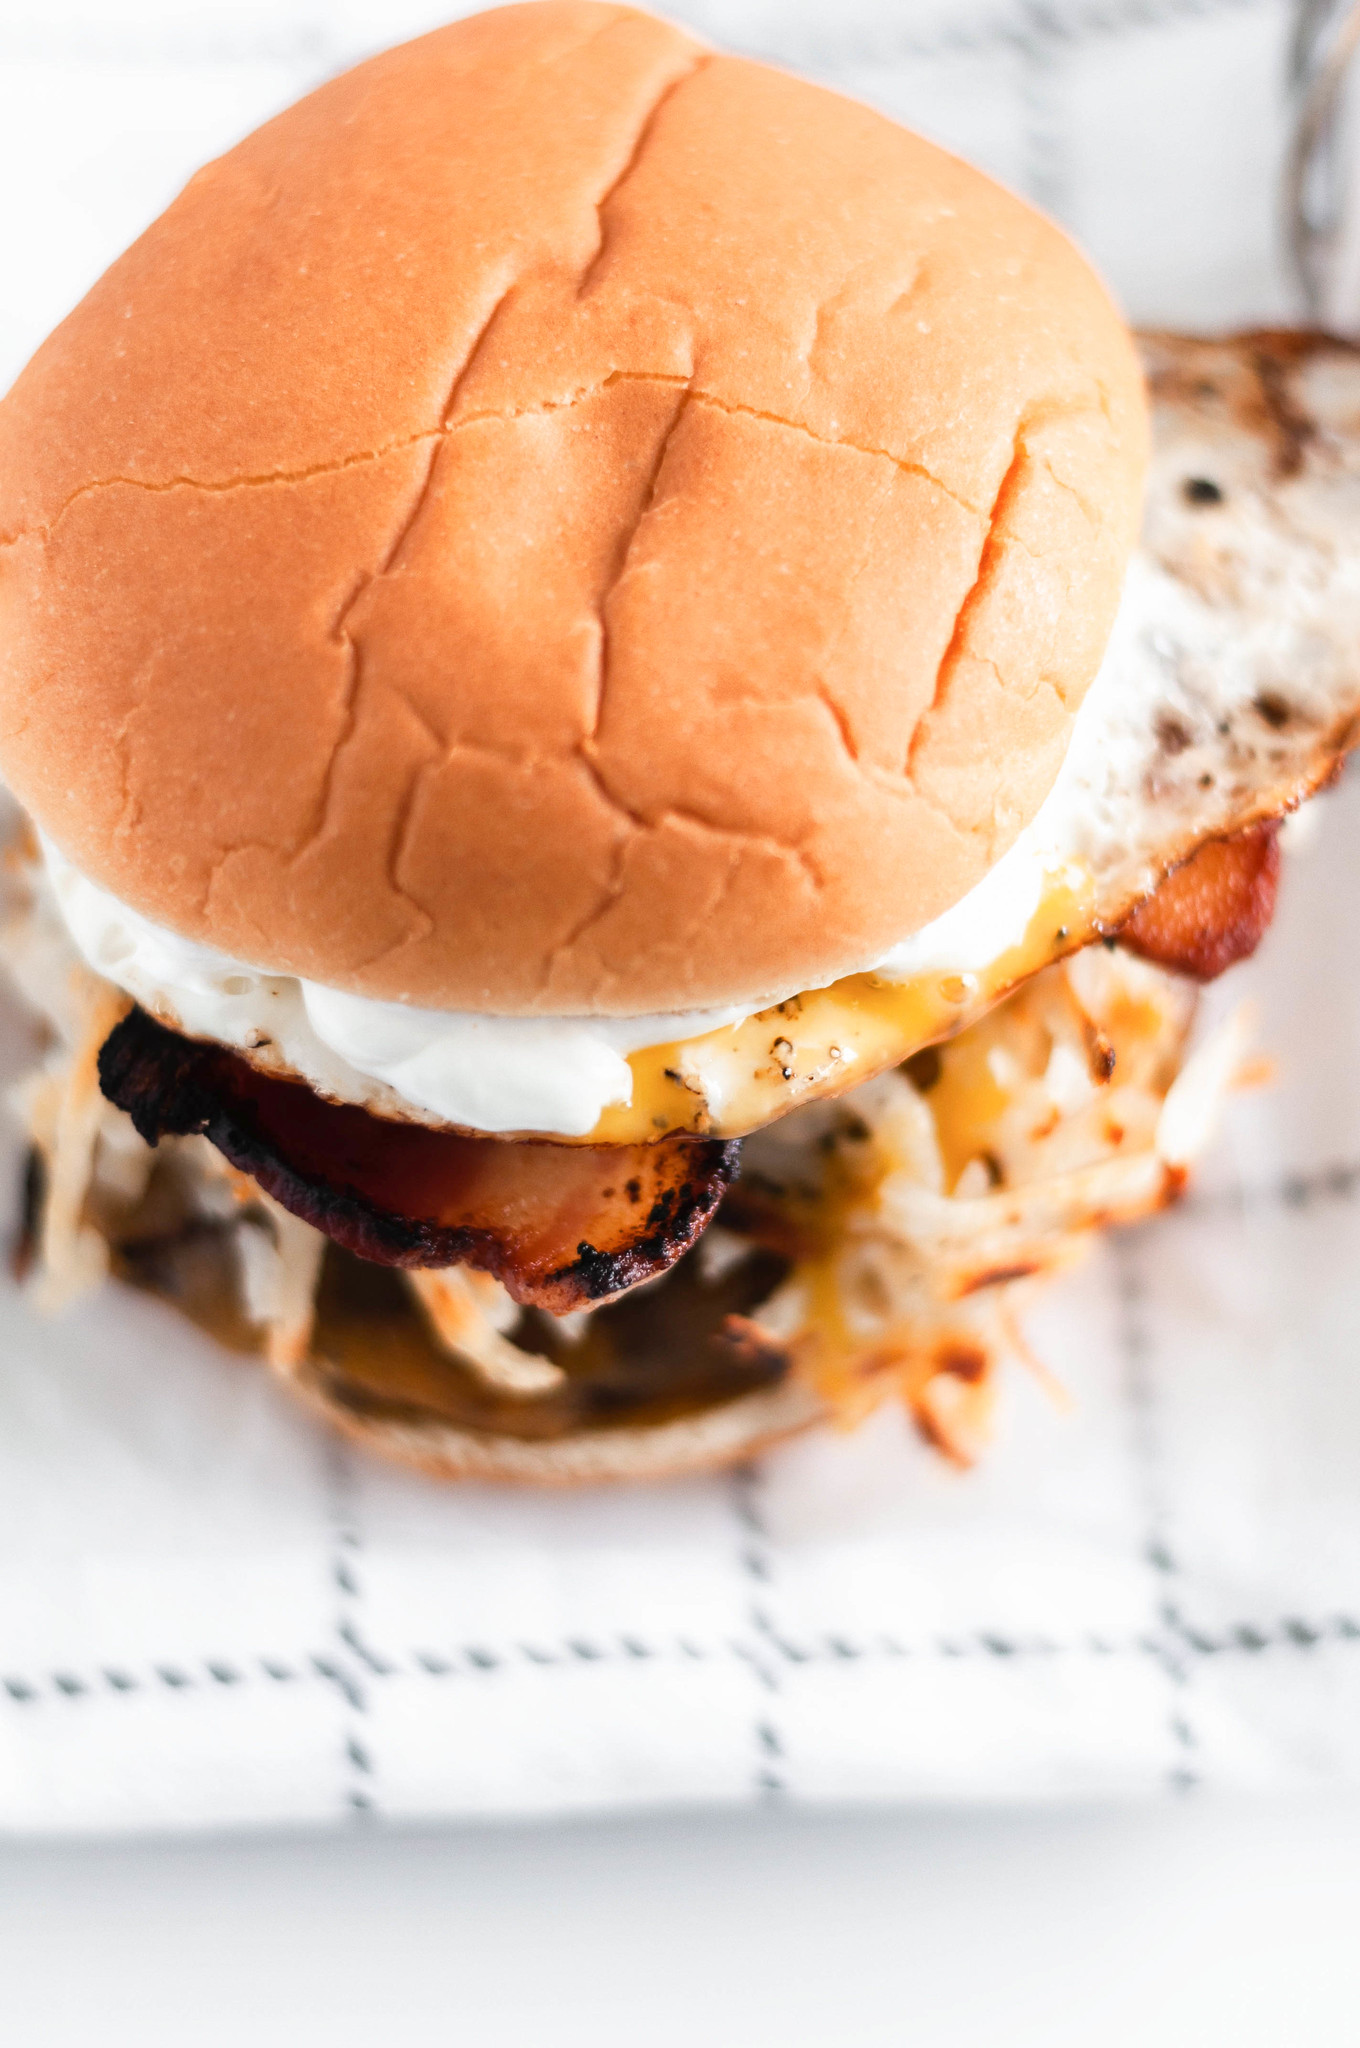 Make these Loaded Breakfast Burgers for dad this Father's Day. Juicy burgers topped with all the breakfast essentials, crispy hash browns, smoky bacon, drippy eggs and sharp cheddar cheese.